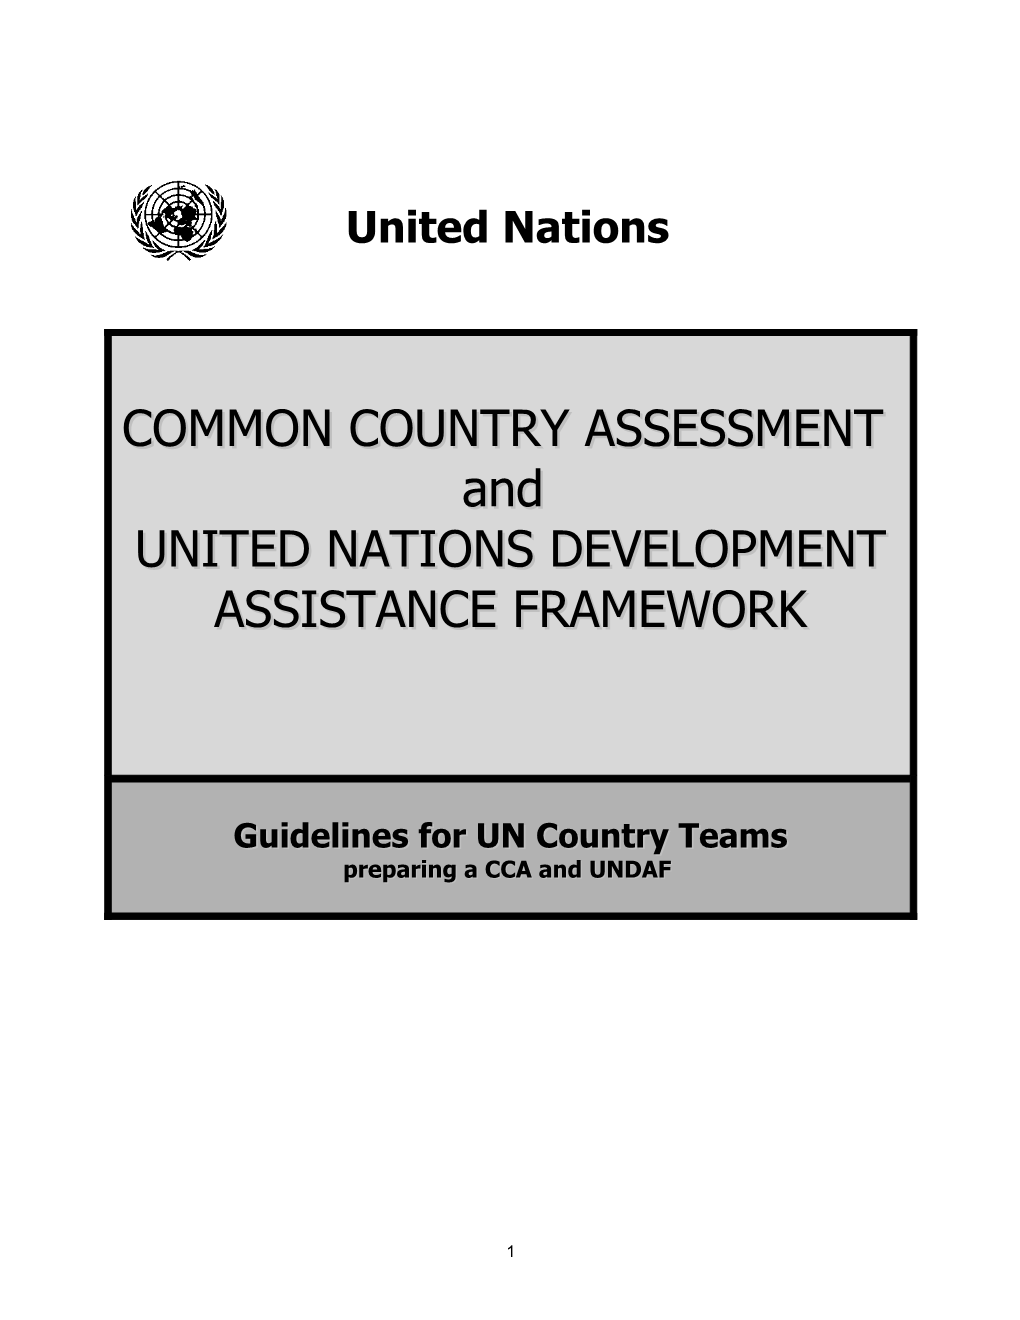 Road Map of the Un Coutry Programming Process 5